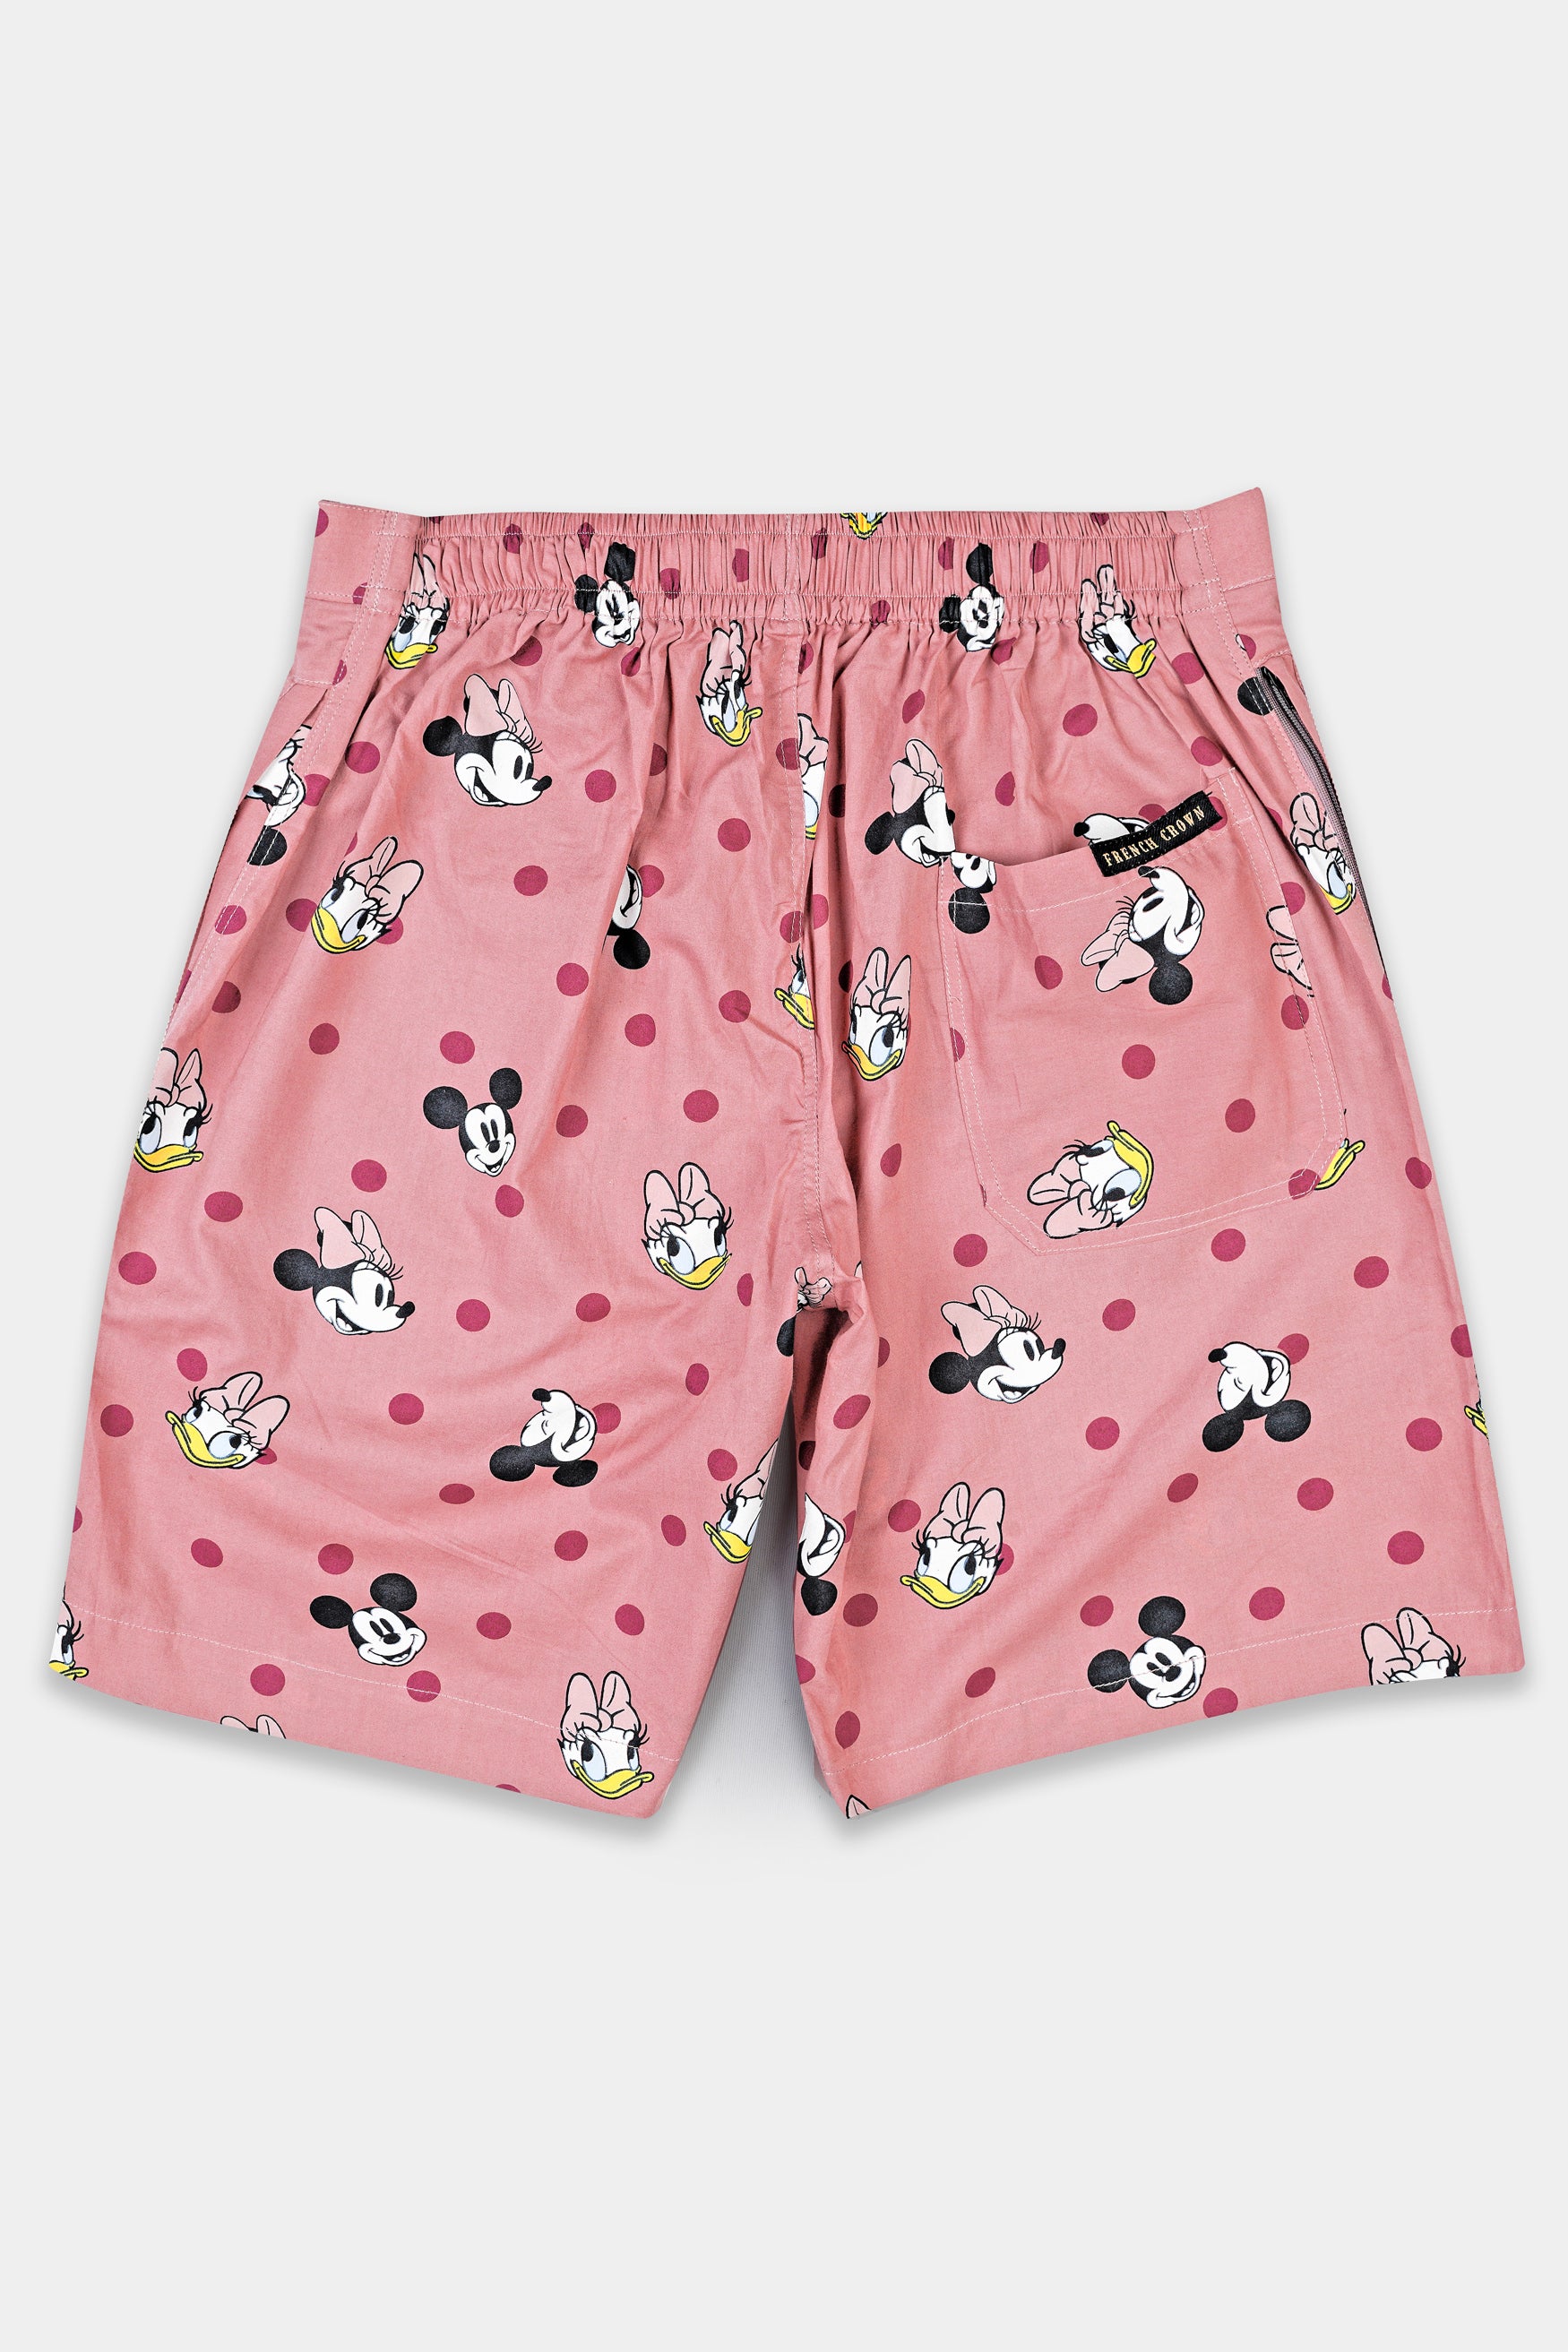 Oriental with Shadz Pink Micky and Daisy Printed Premium Cotton Shorts SR351-28,  SR351-30,  SR351-32,  SR351-34,  SR351-36,  SR351-38,  SR351-40,  SR351-42,  SR351-44